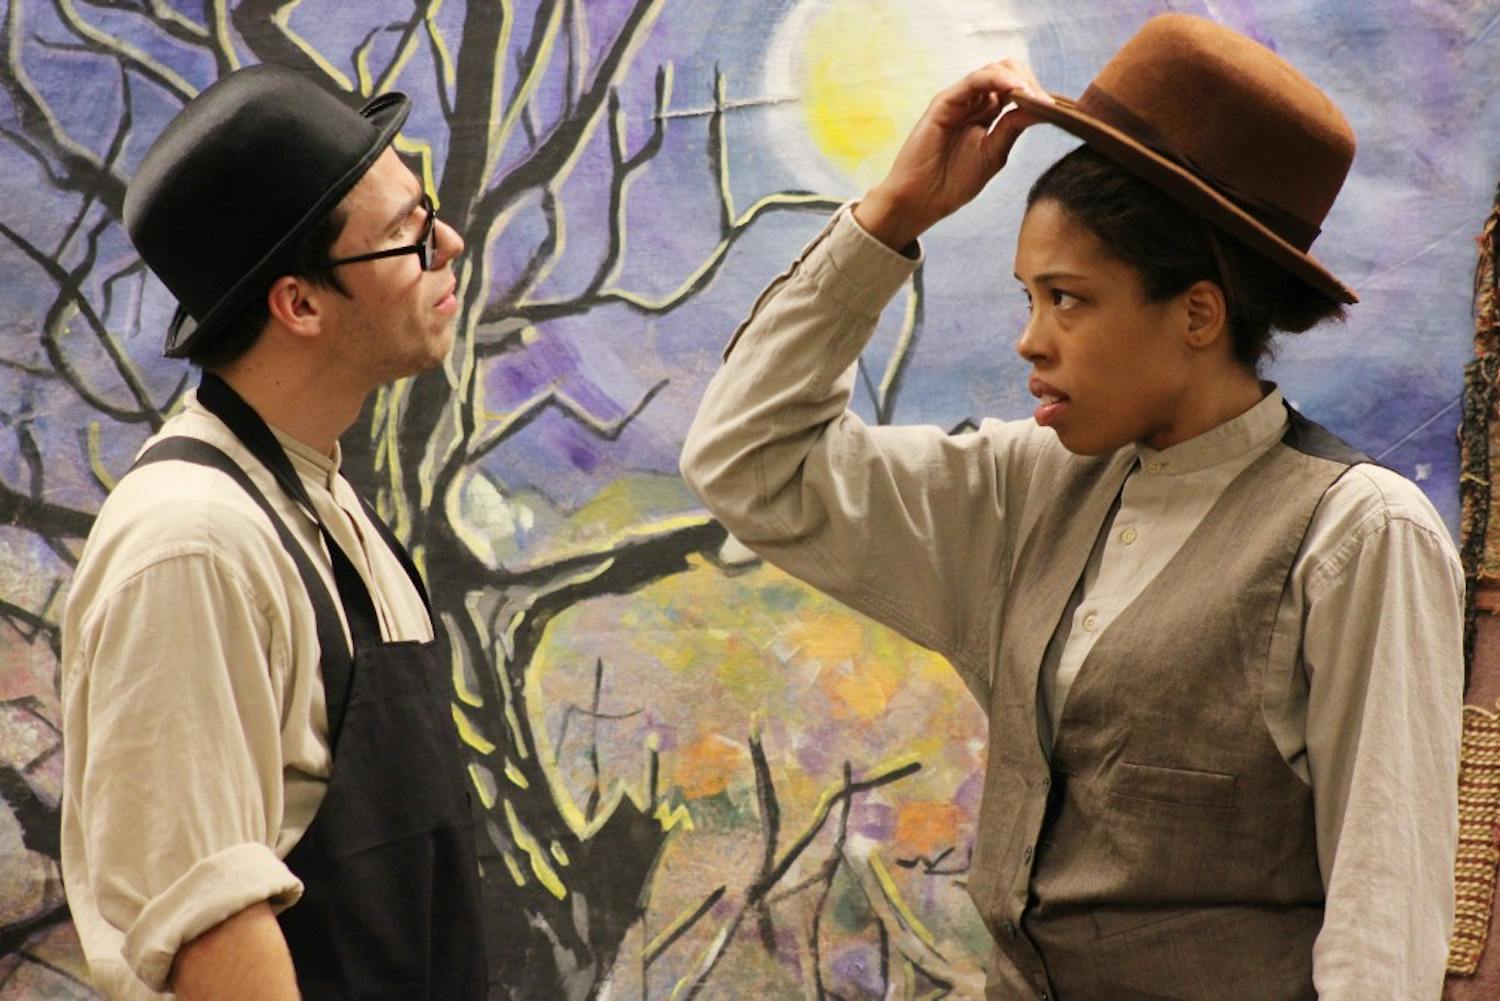 Bright Star theatre presents "Heroes of the Underground Railroad" at the main Orange County Library in Hillsborough at 6:00 p.m. Thursday evening. Kaurie Tubman (left) and Travis Emery (right) performed all roles in the play.